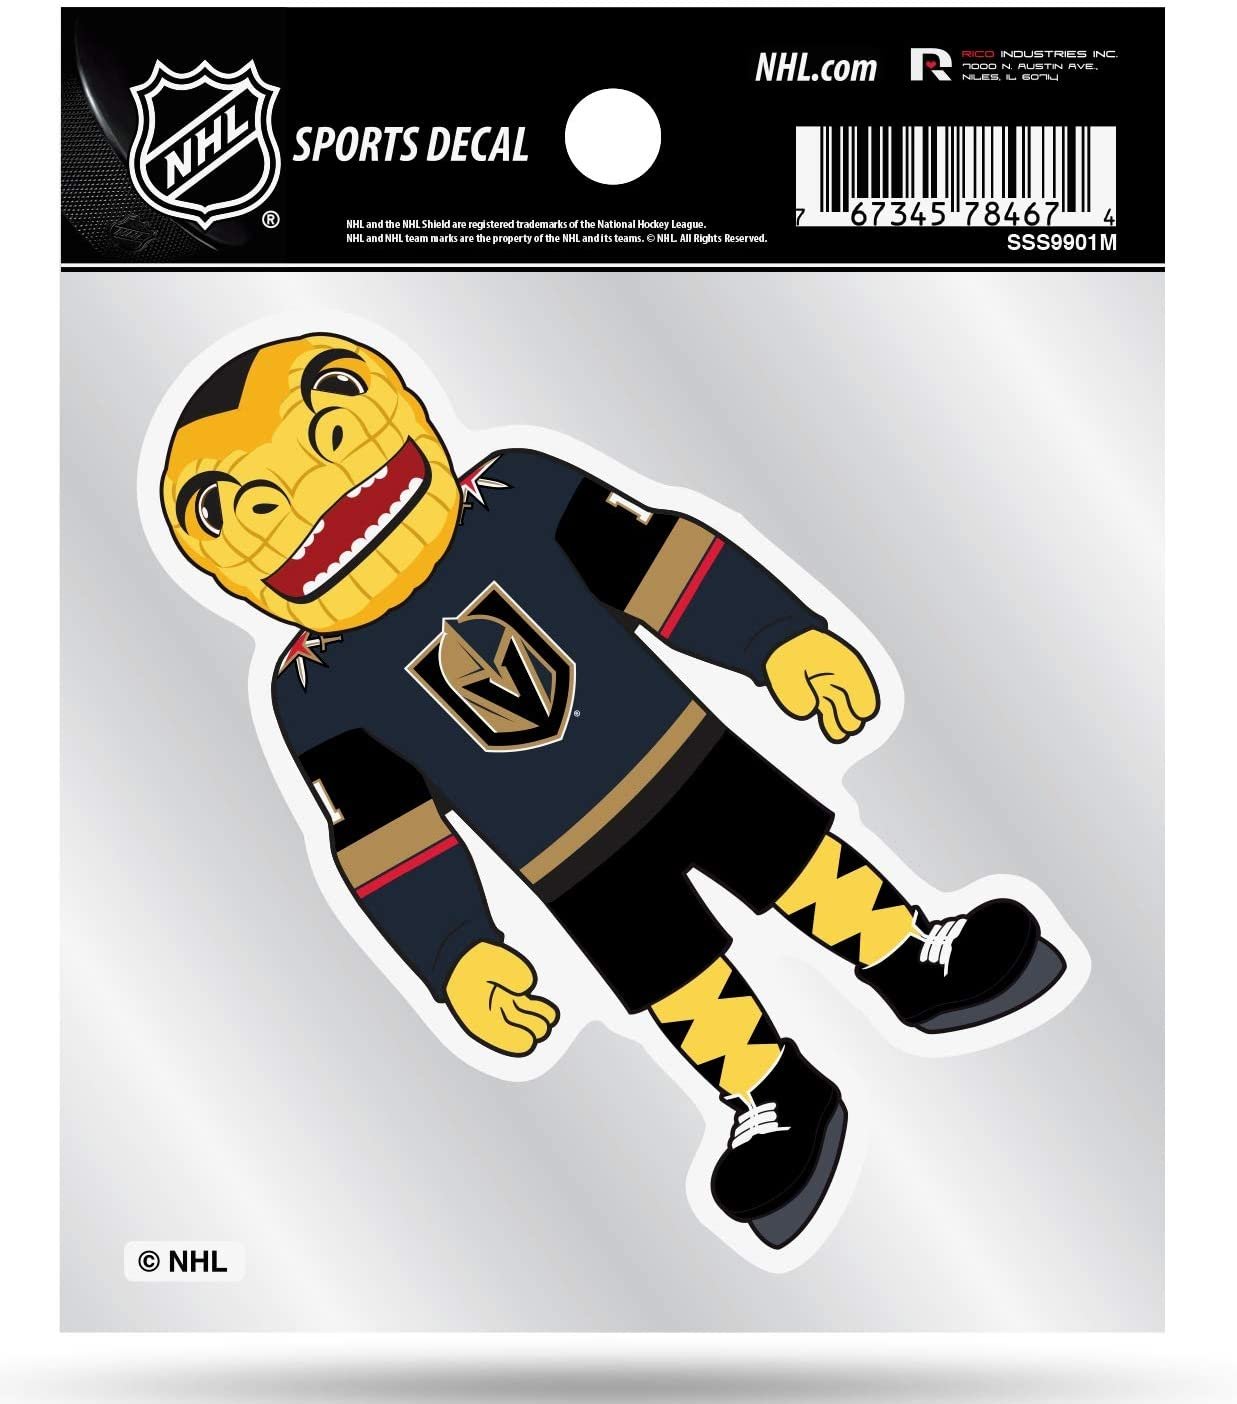 Vegas Golden Knights 4x4 Decal Sticker Mascot Logo Premium with Clear Backing Flat Vinyl Auto Home Hockey